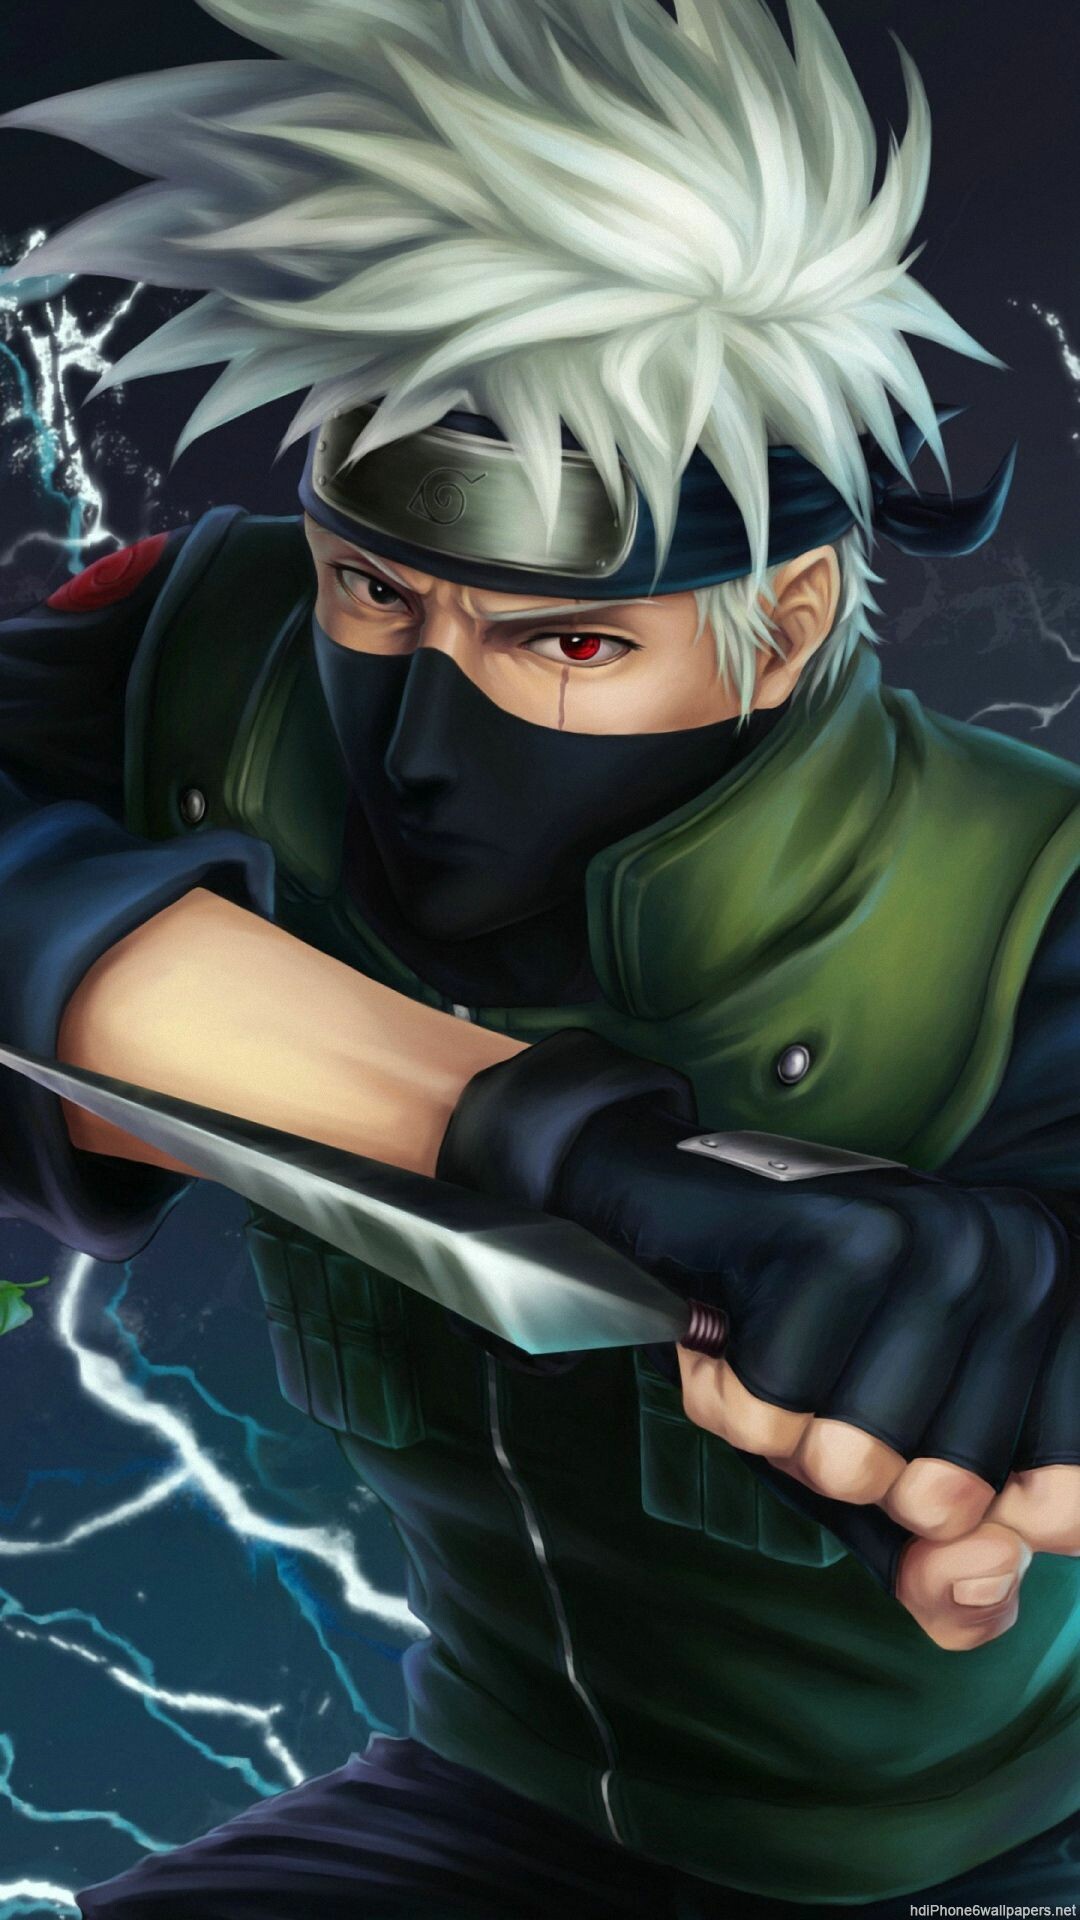 56 Kakashi Wallpapers Hd 4k 5k For Pc And Mobile Download Free Images For Iphone Android